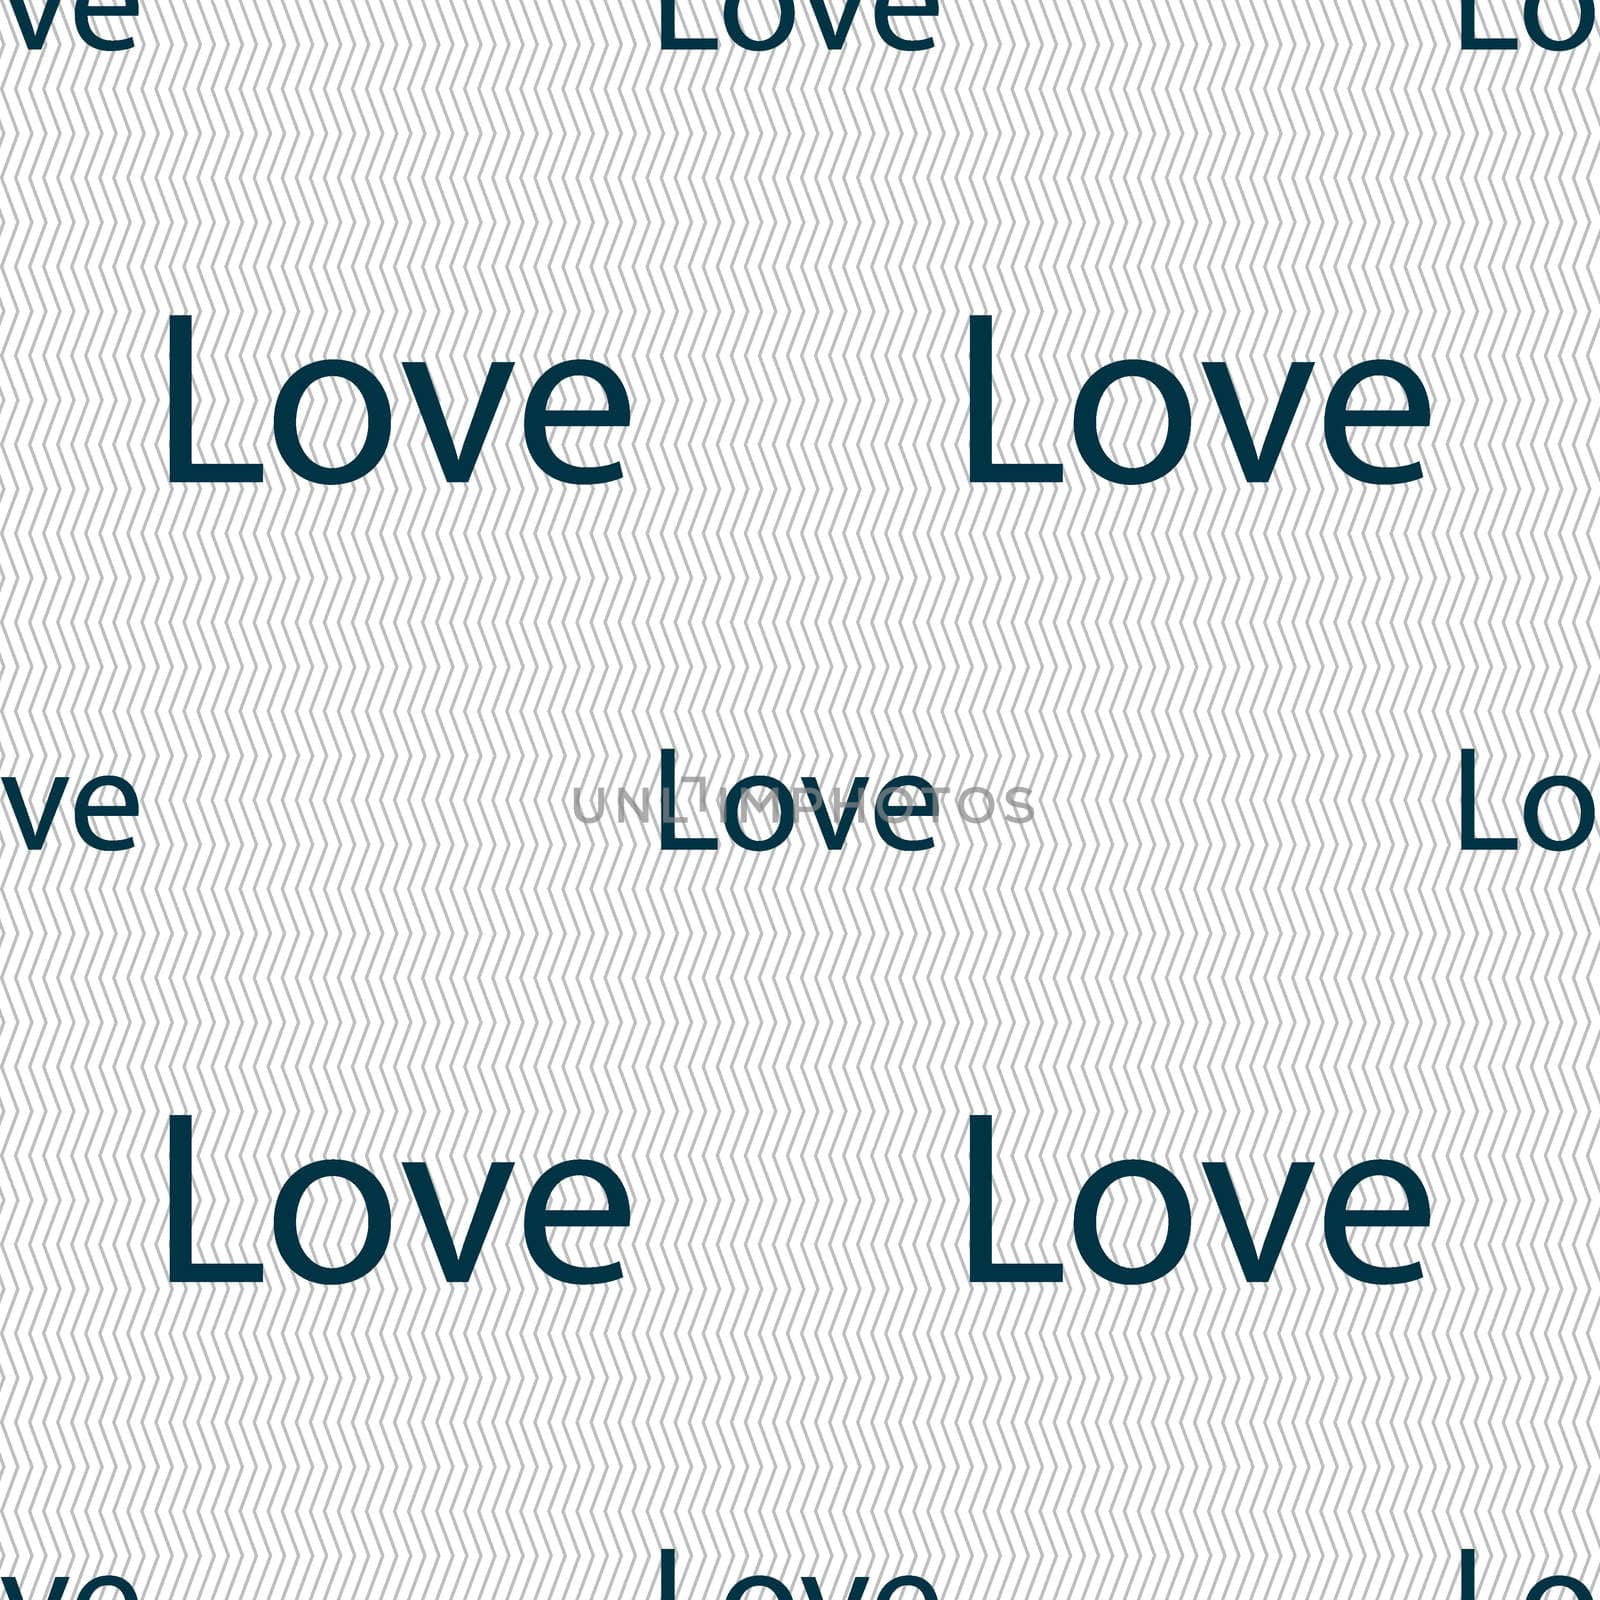 Love you sign icon. Valentines day symbol. Seamless abstract background with geometric shapes. illustration